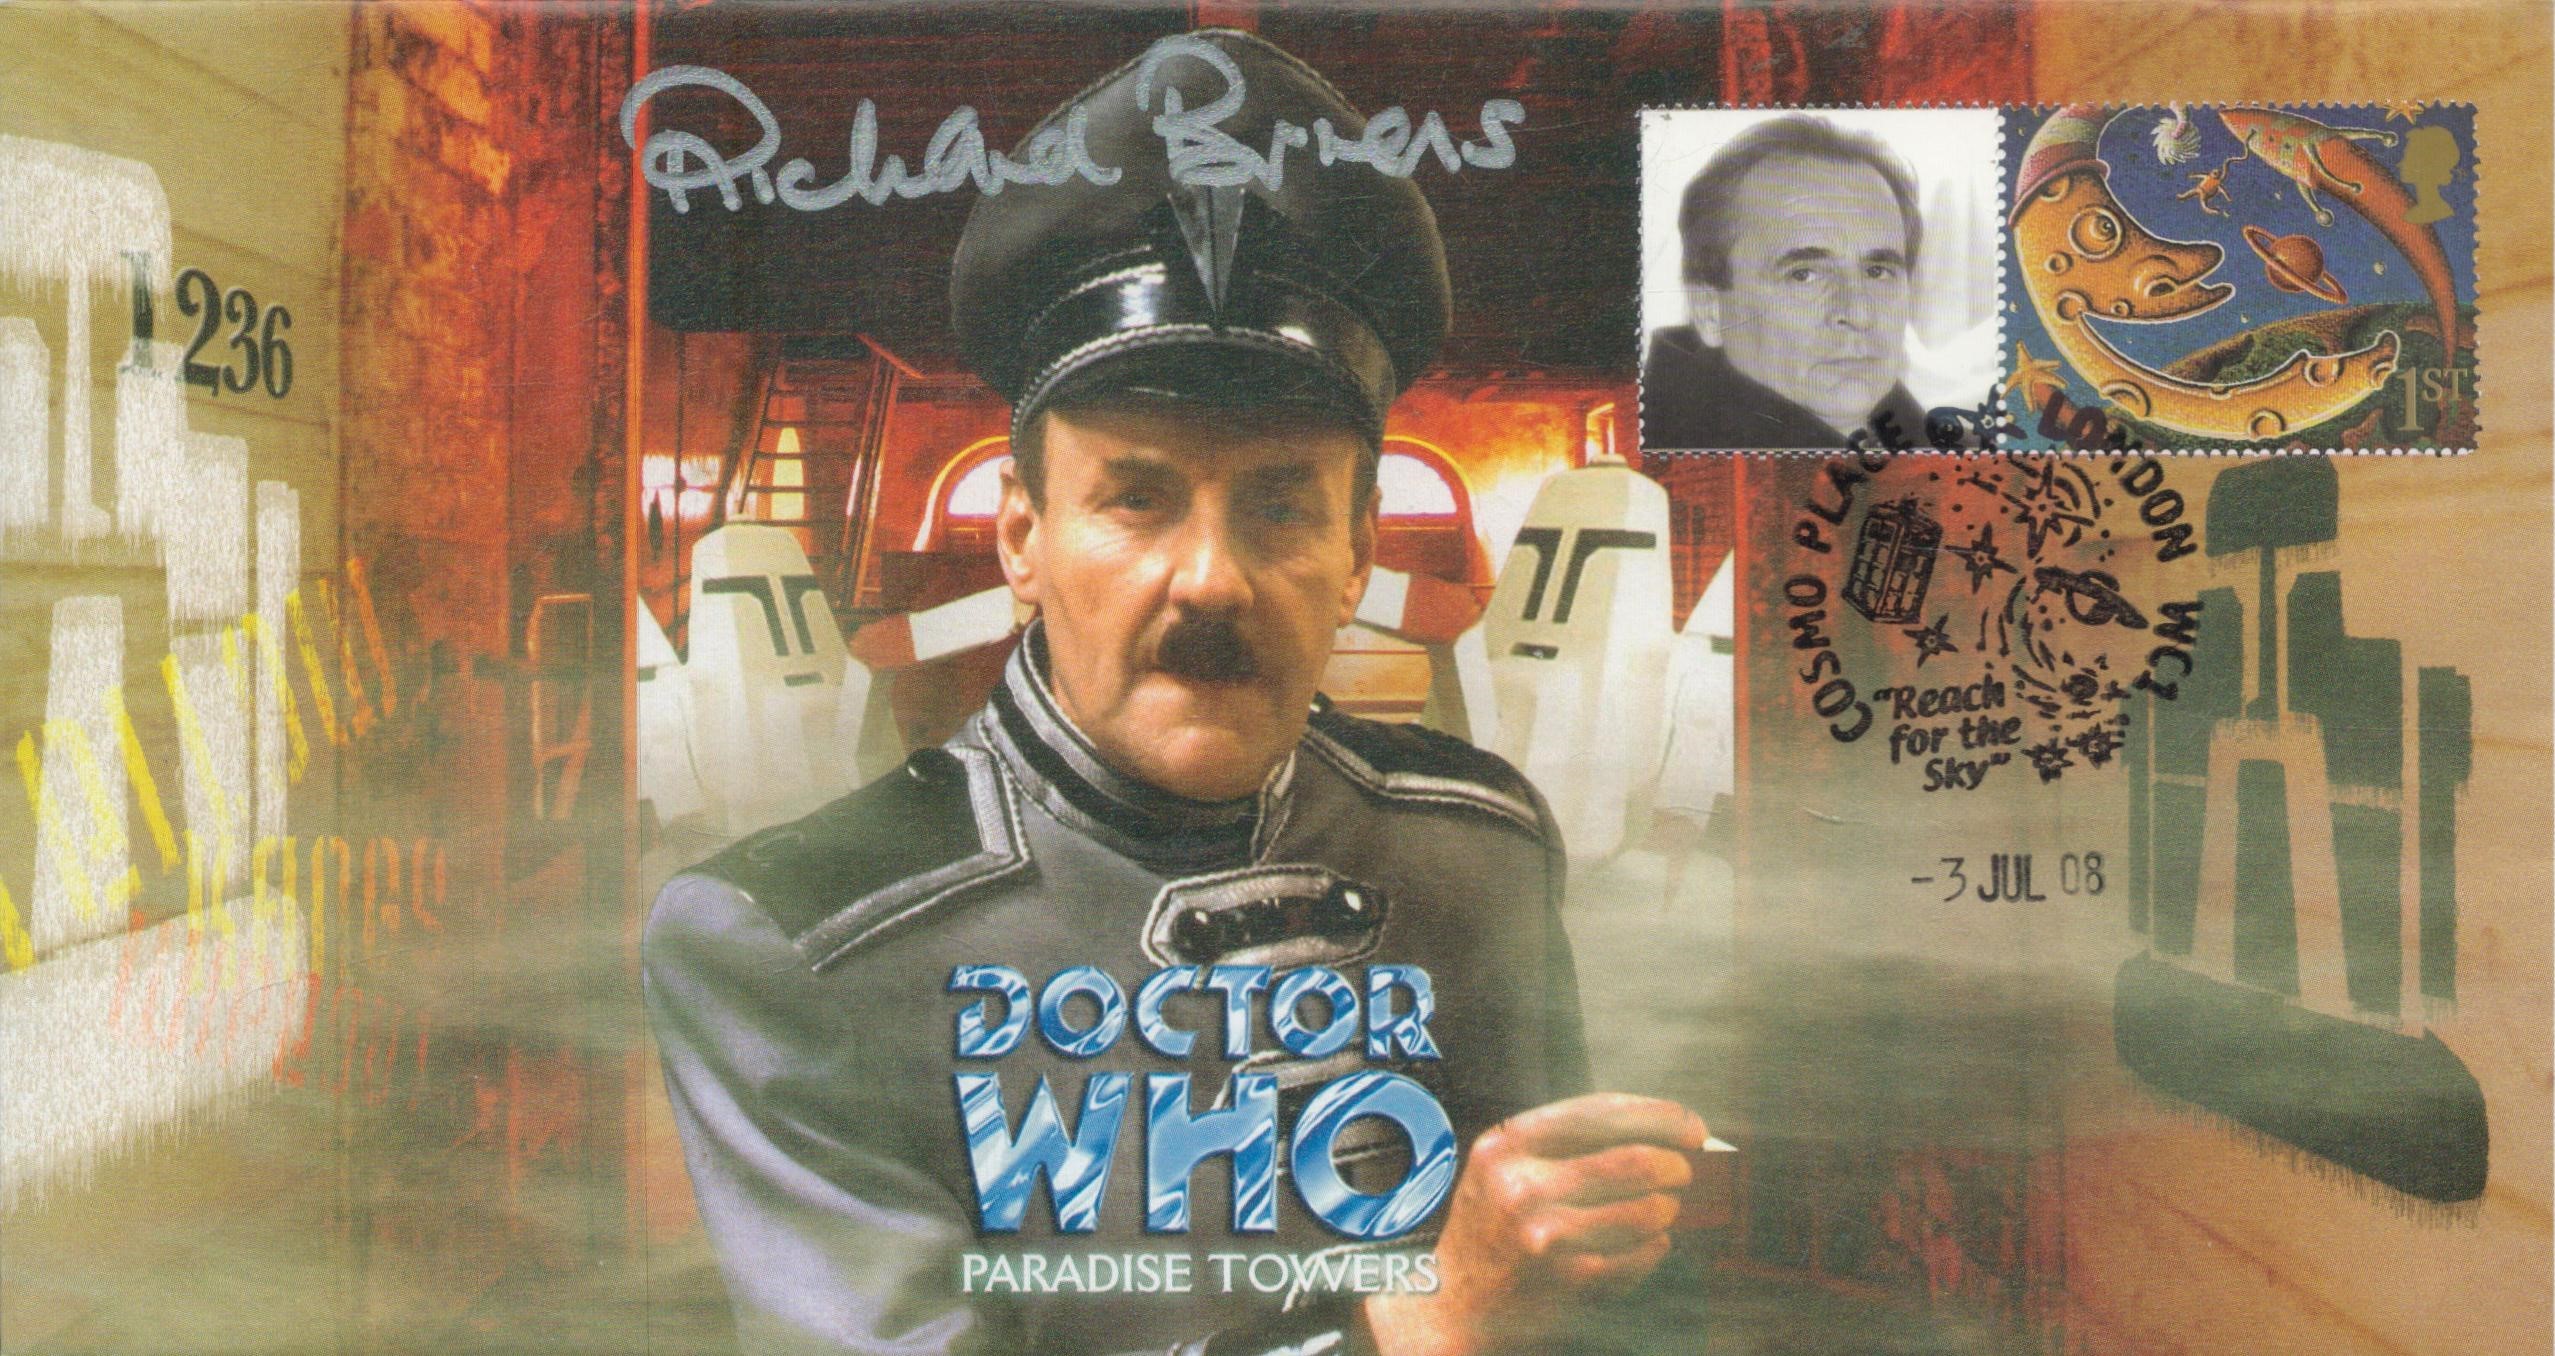 Richard Briers signed Doctor Who Paradise Towers FDC PM Cosmos Place London WC1 3 Jul 08. Good